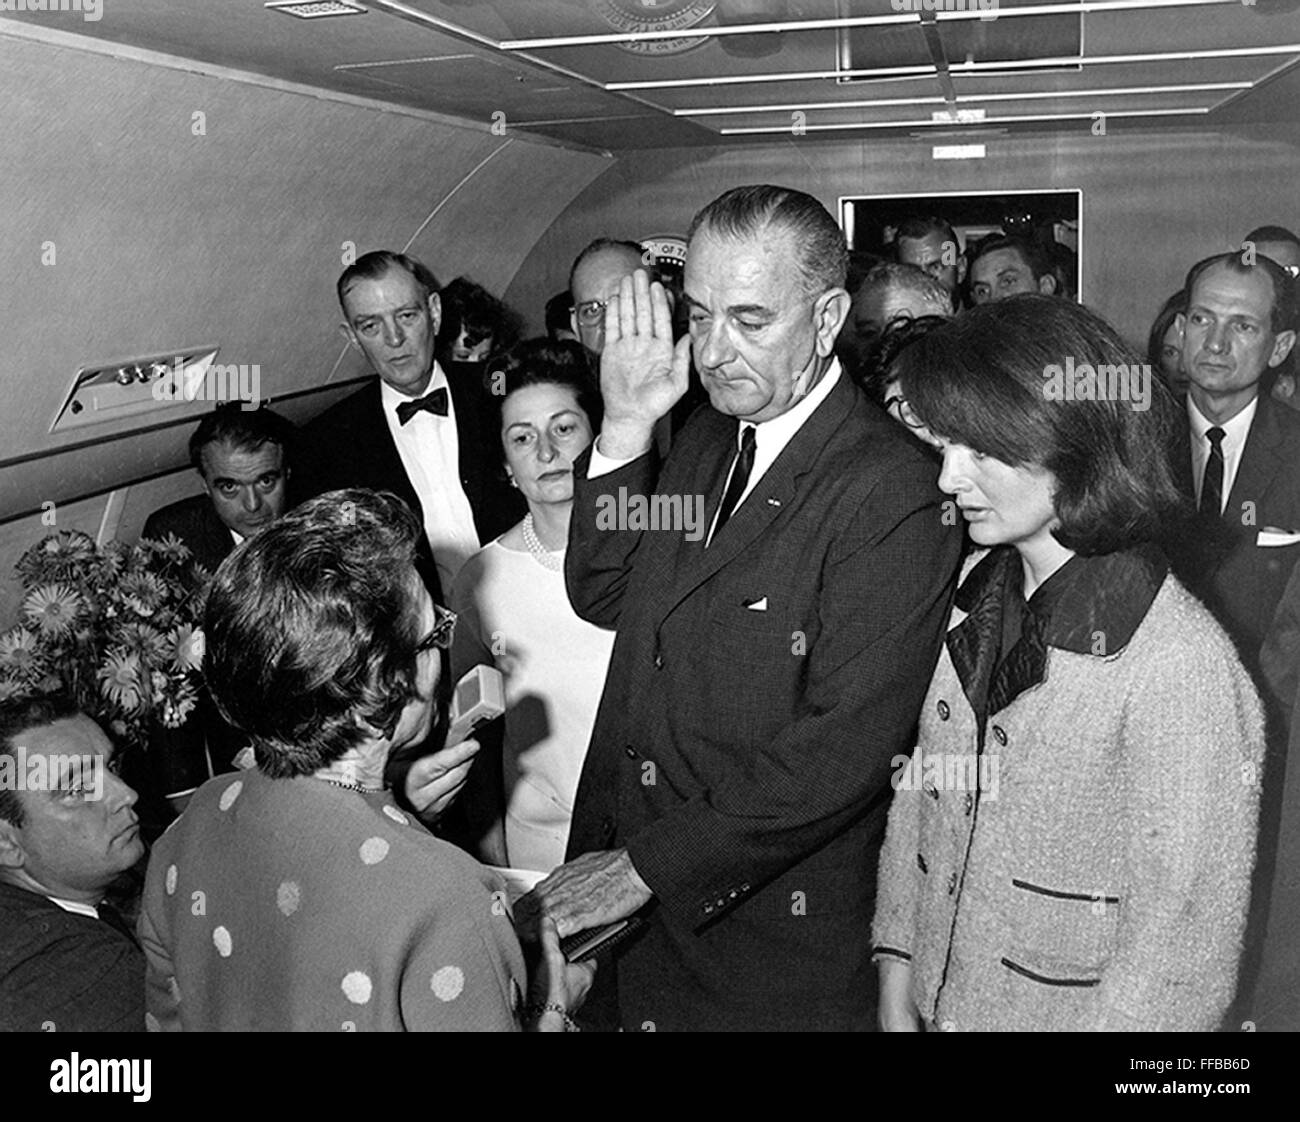 Air Force One 8 12 x 11 image President Johnson Photo 1968